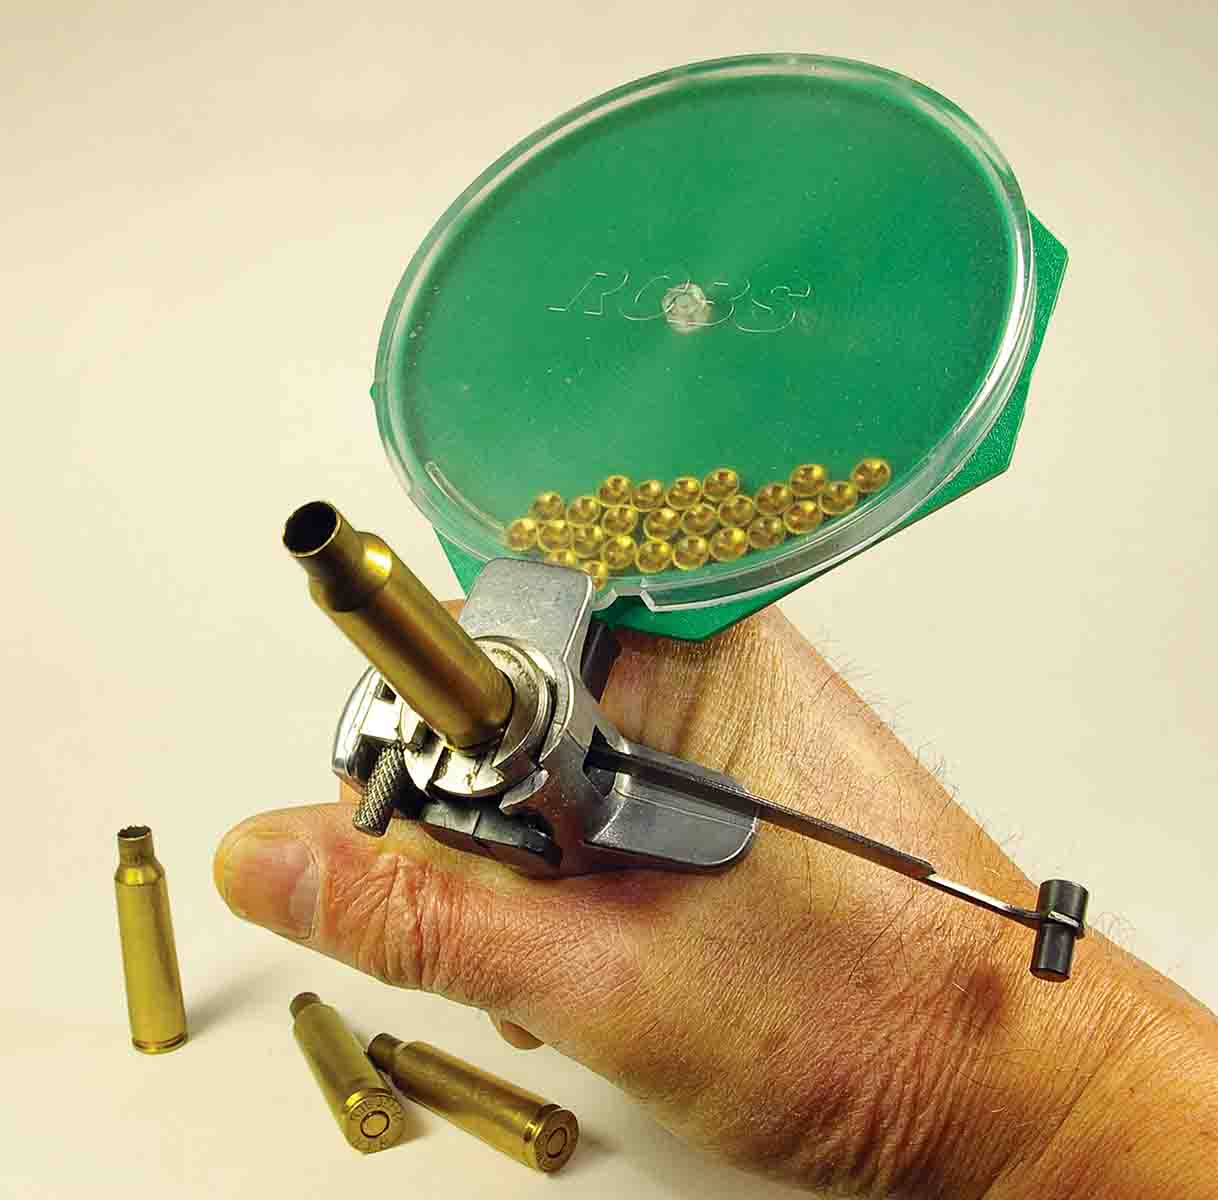 A handheld priming tool allows a handloader to feel the primer seat properly.